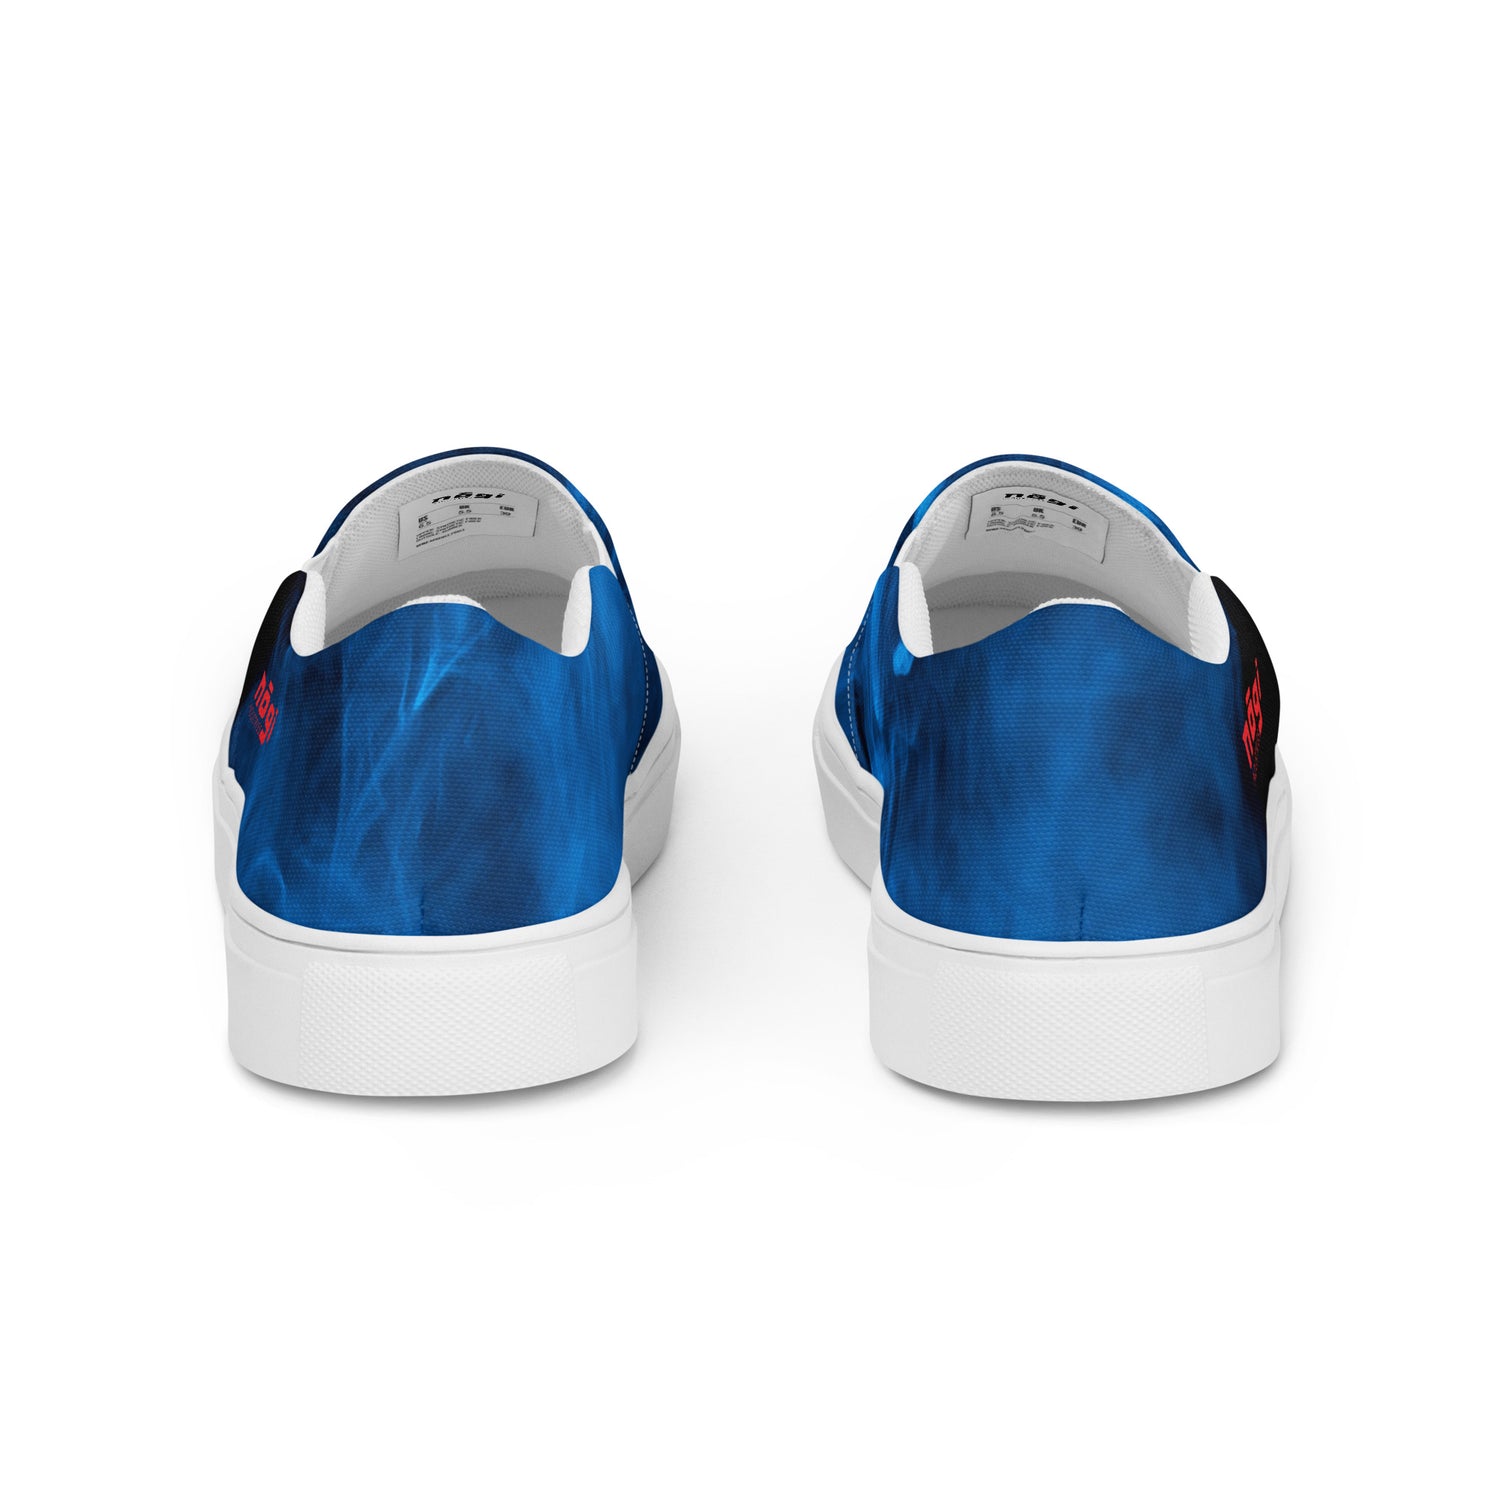 Blue Smoke Men’s Slip-on Canvas Shoes by Nogi Industries